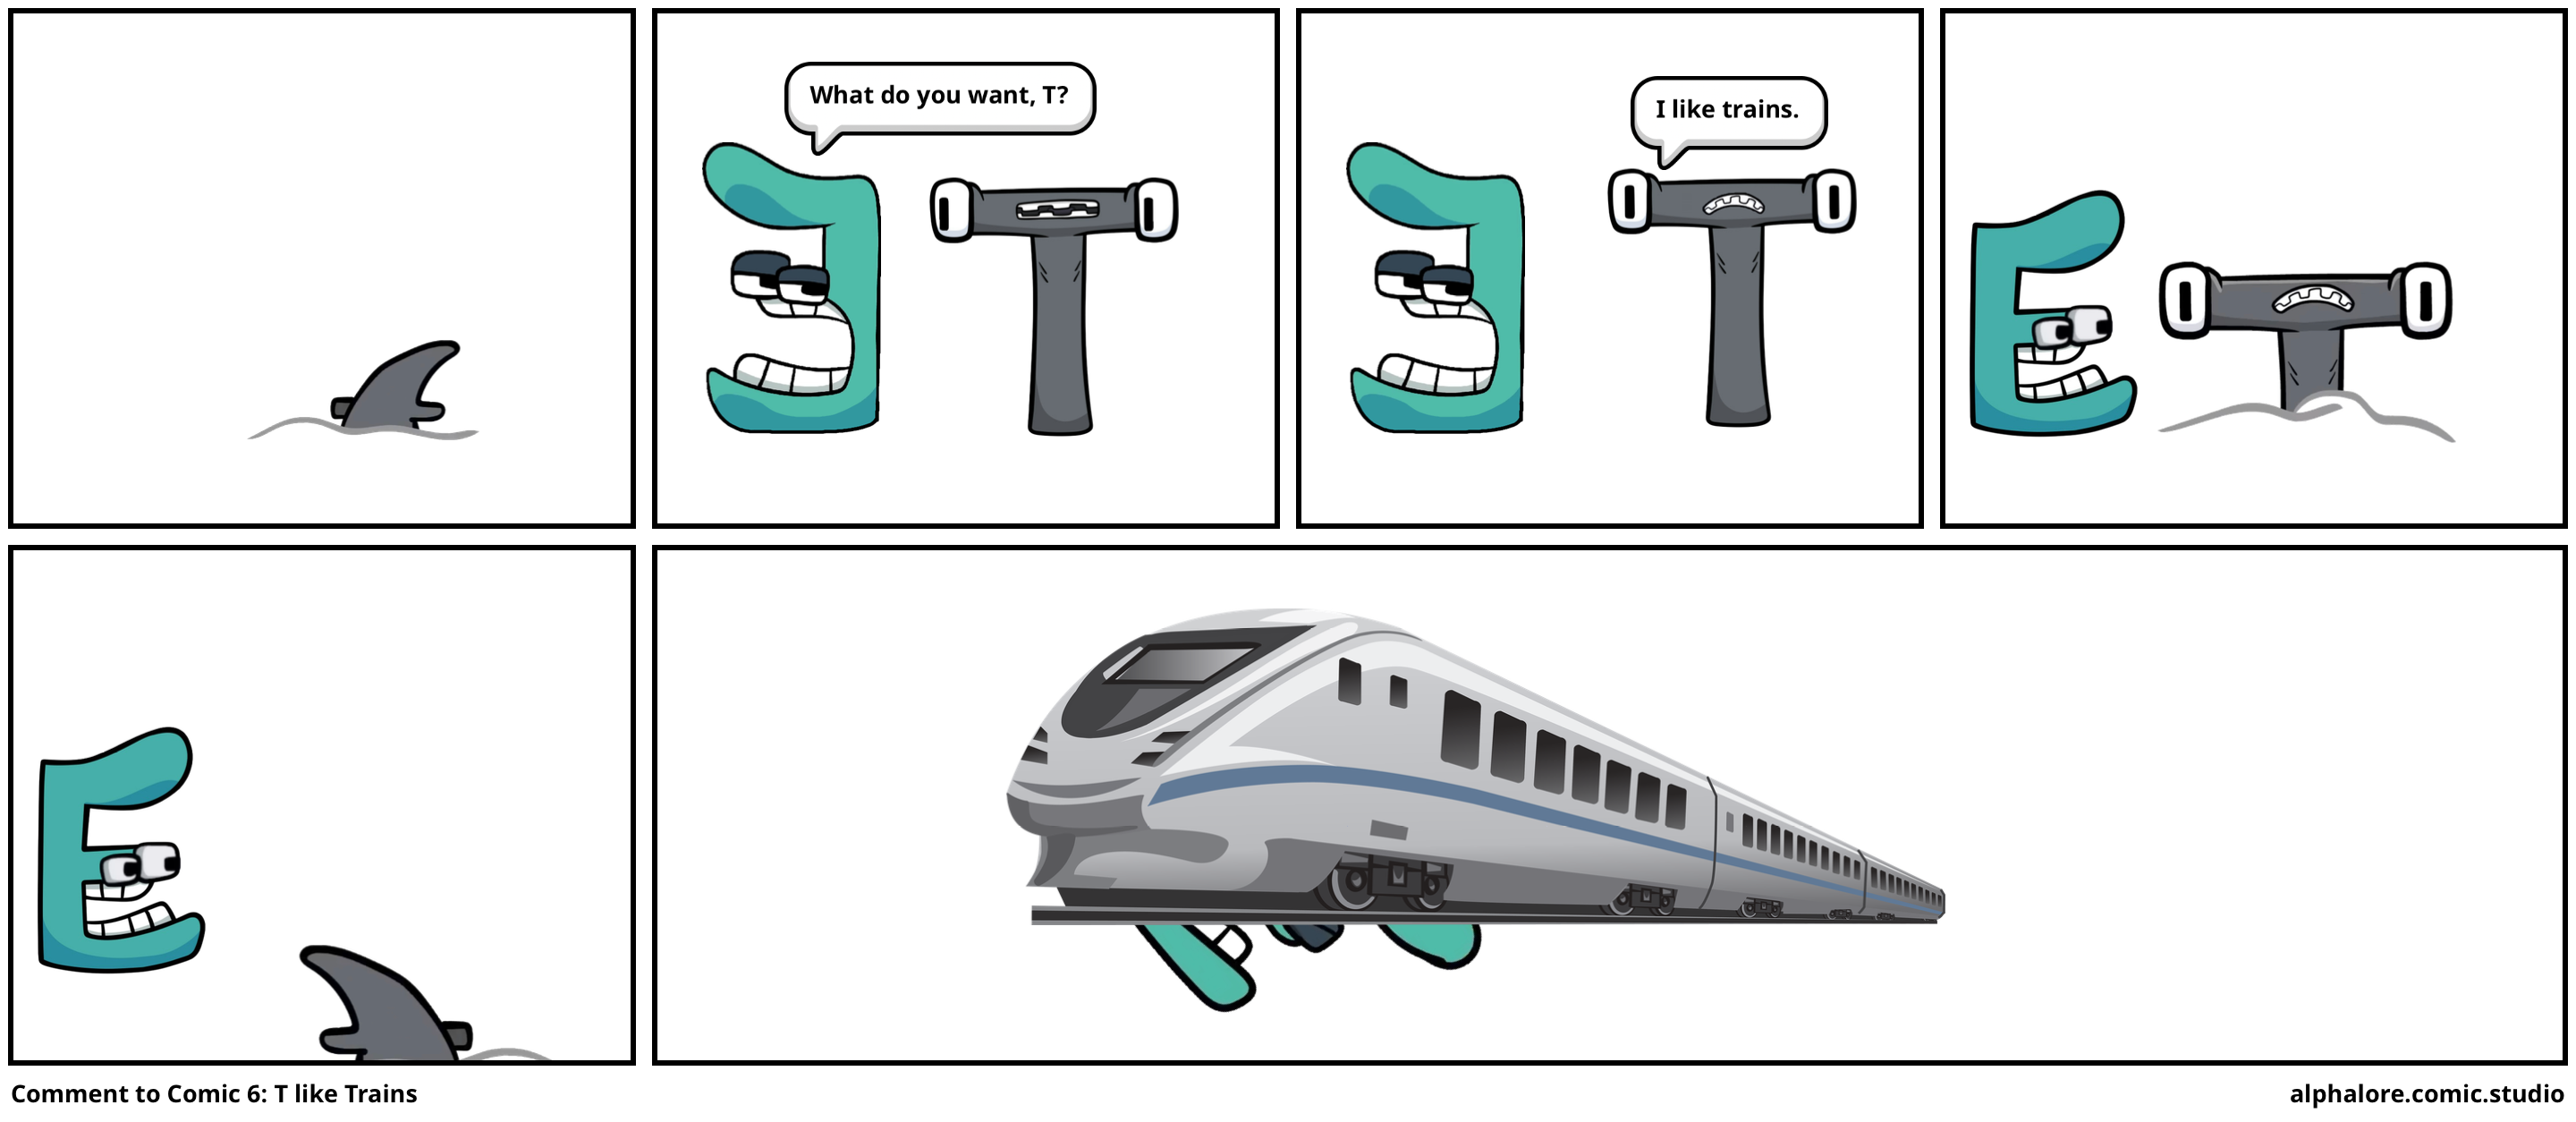 Comment to Comic 6: T like Trains